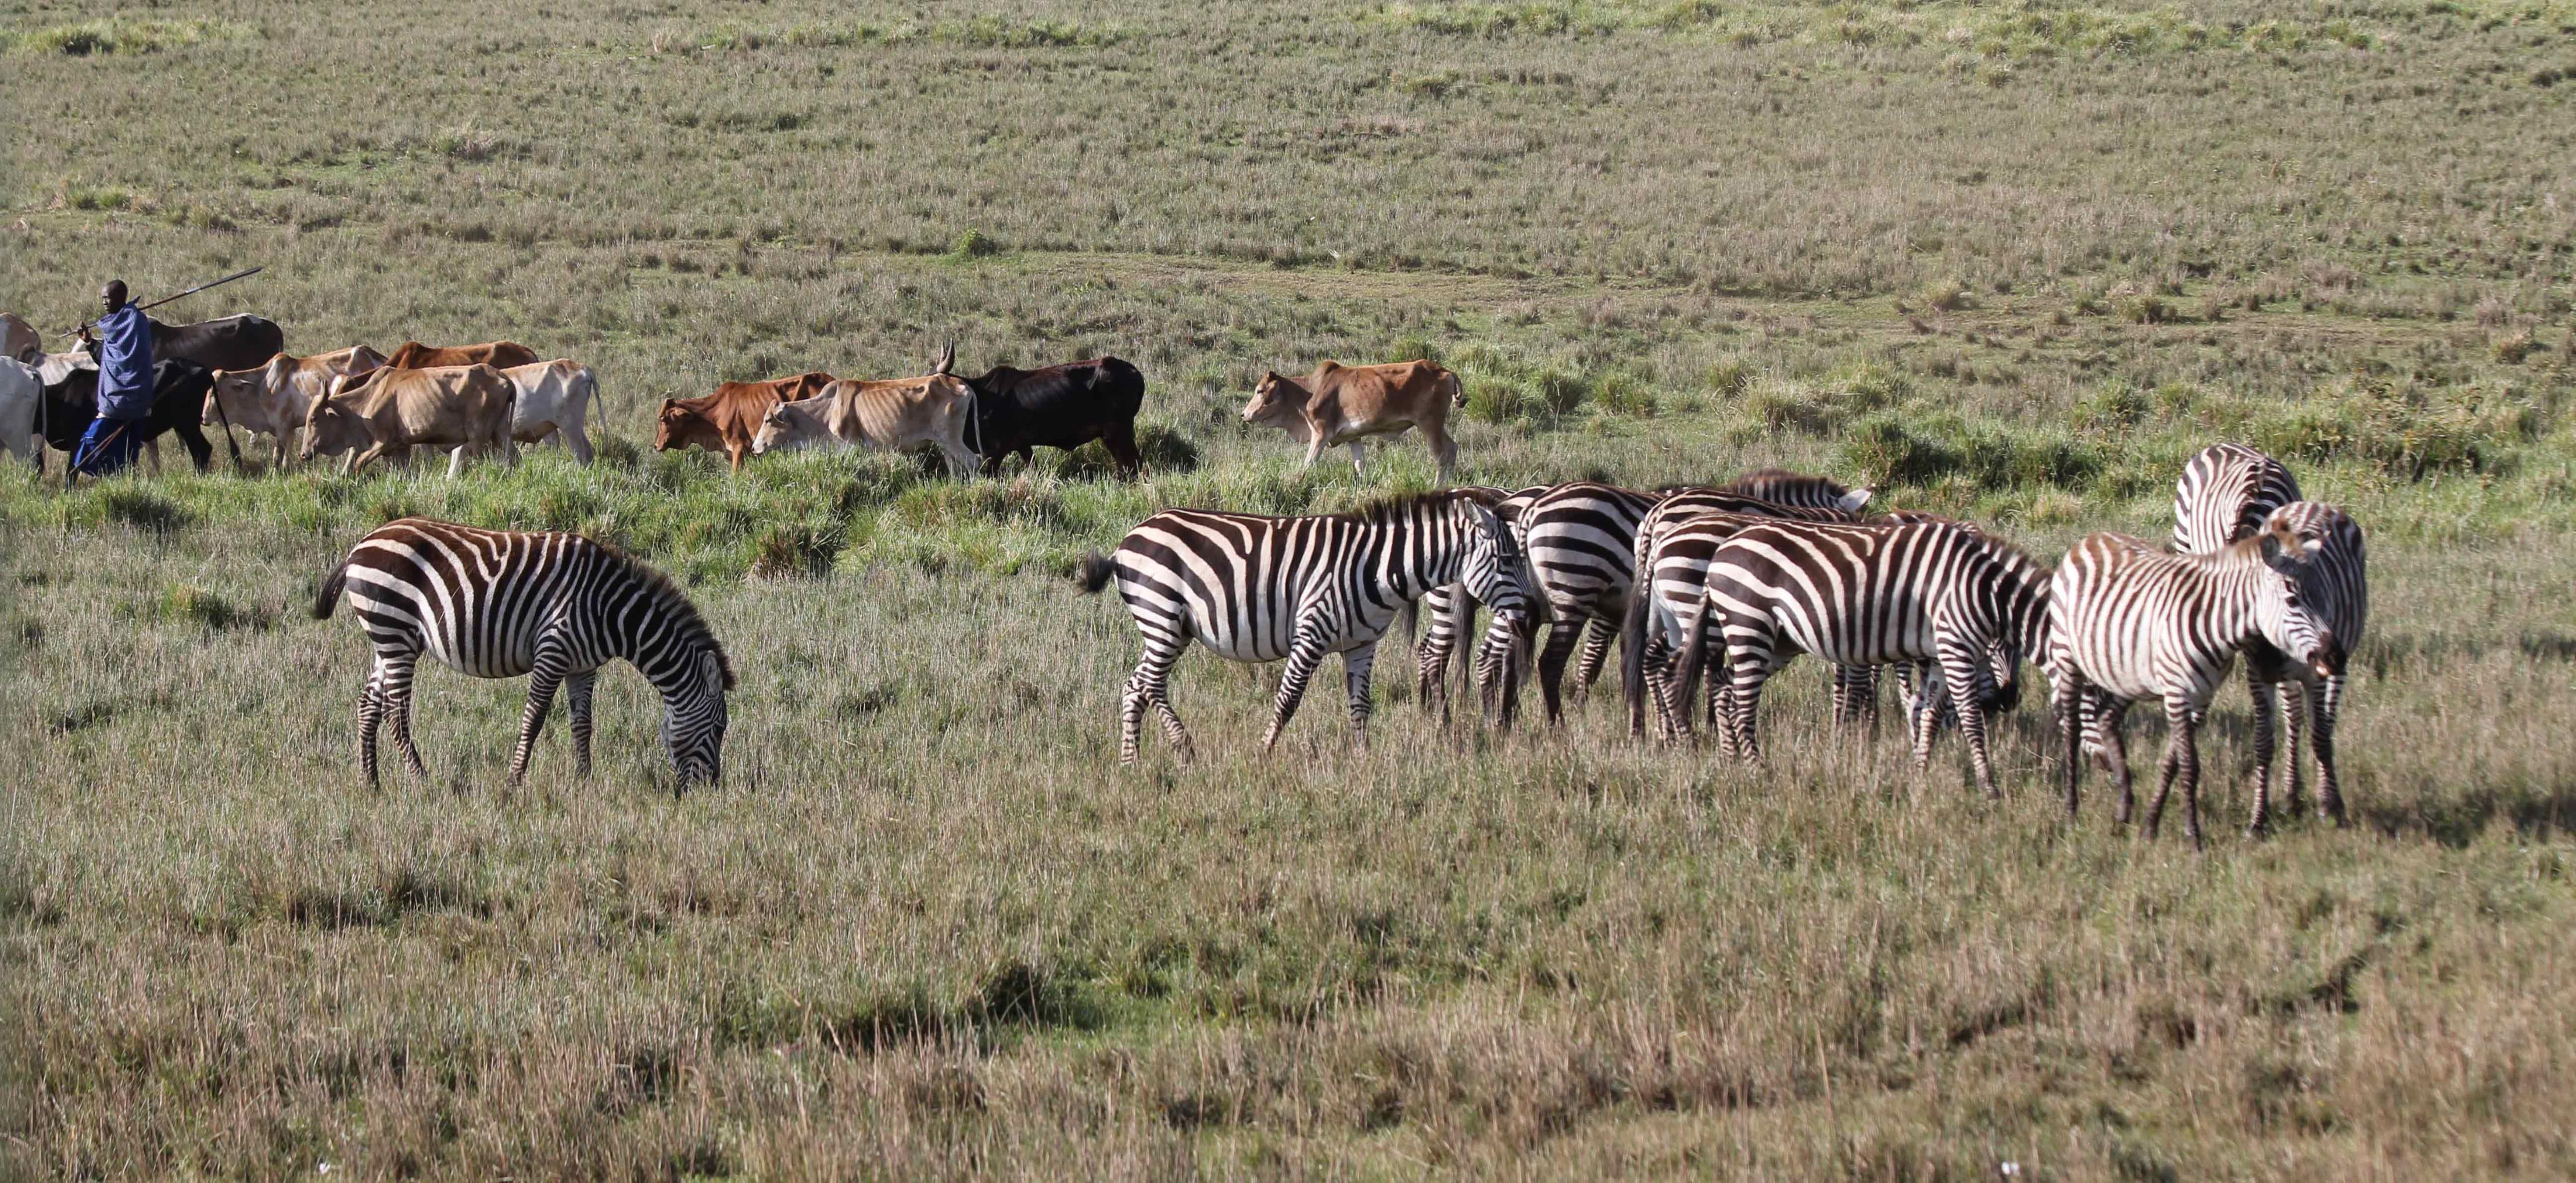 Cattle and zebra grazing together